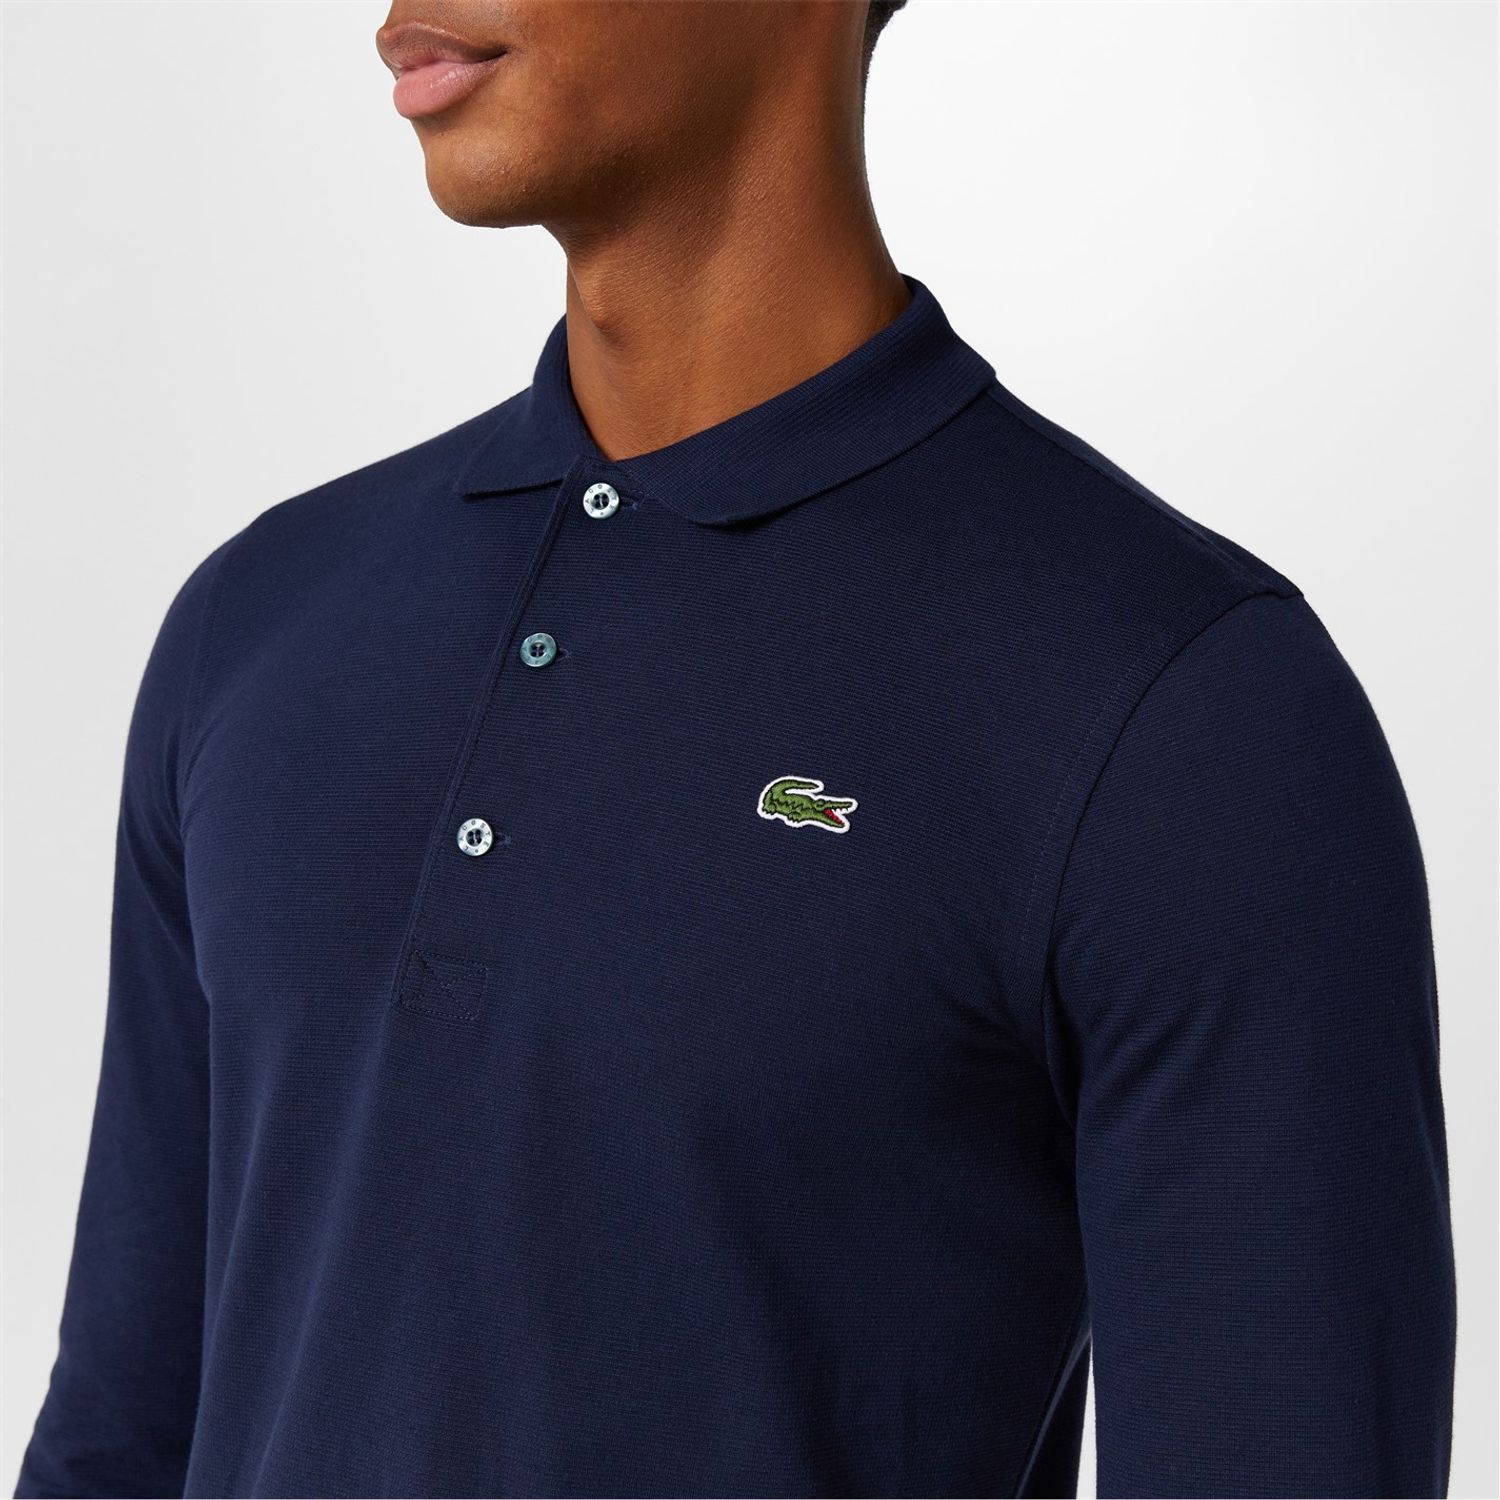 Blue Lacoste Sleeve Polo Shirt - Get The Label